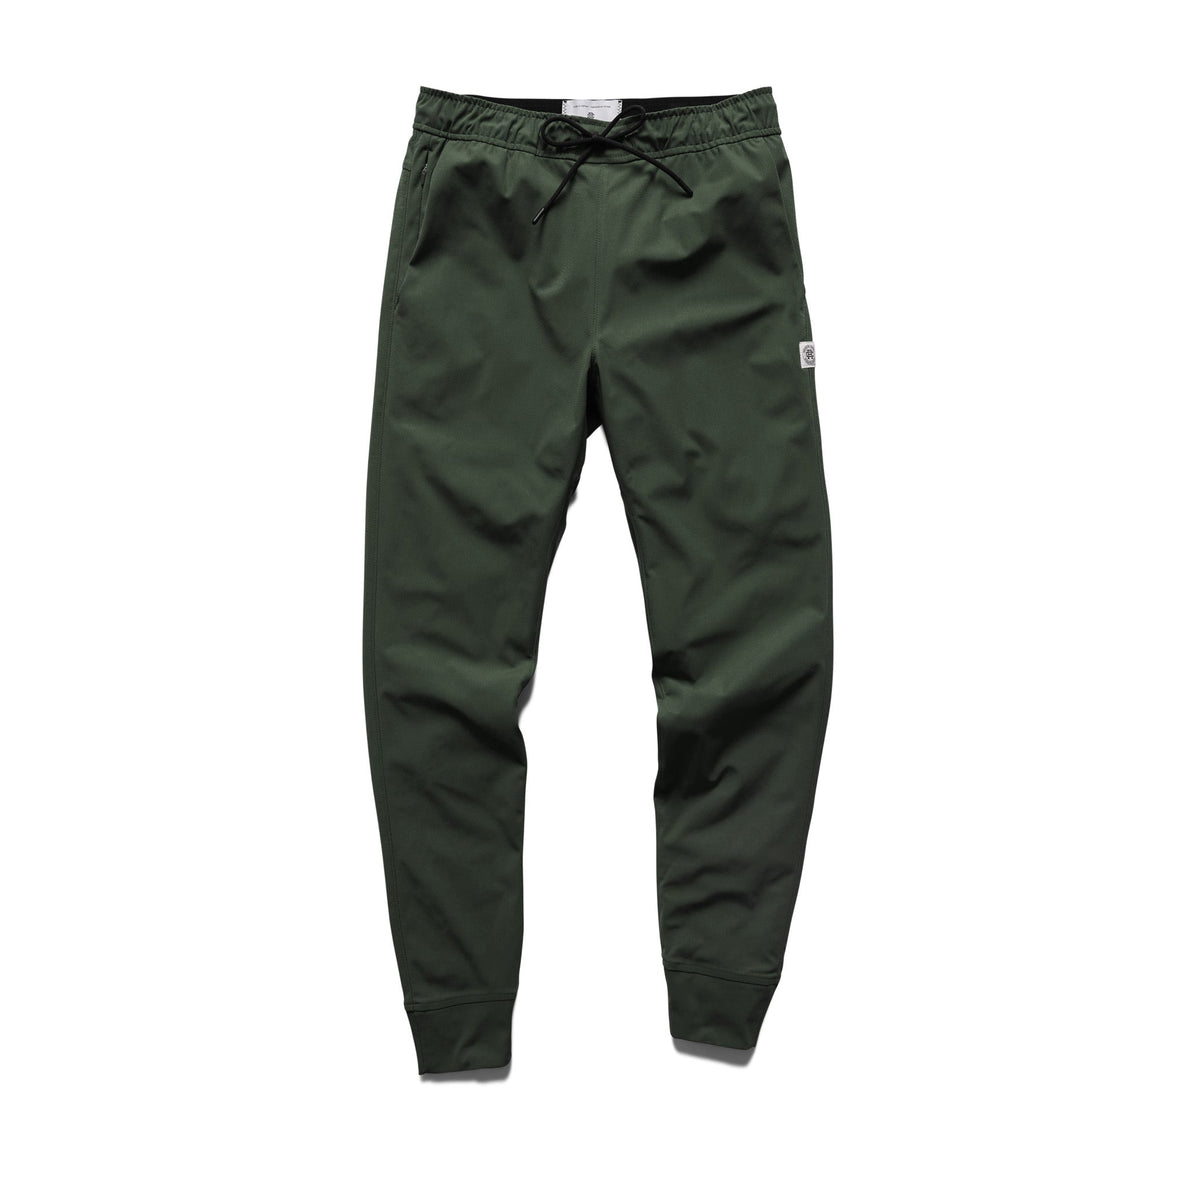 【Reigning Champ】Coach's Jogger | Reigning Champ JP